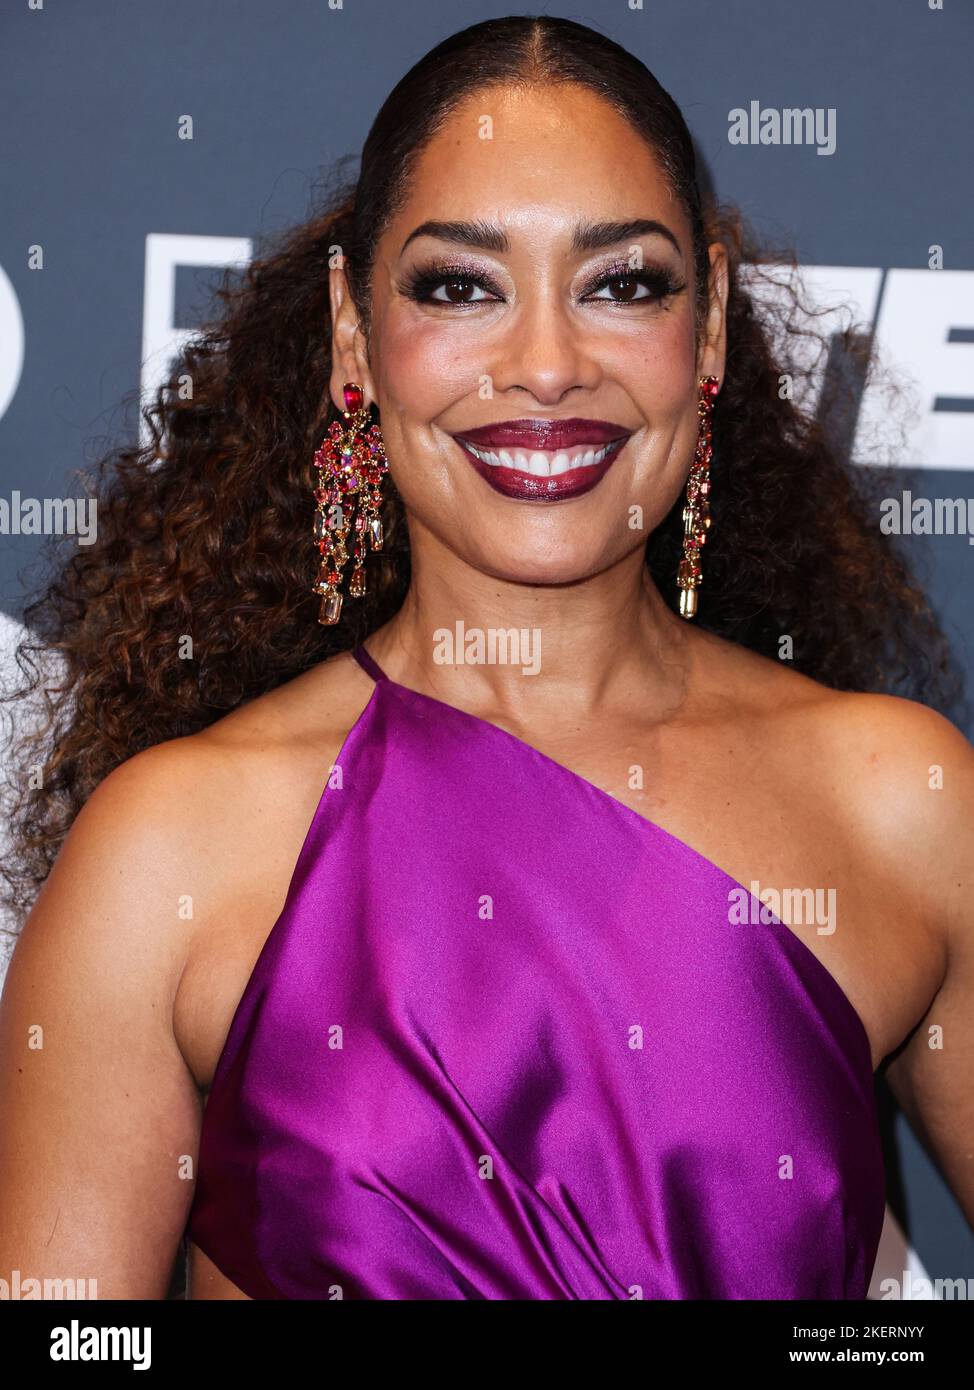 Century City, United States. 13th Nov, 2022. CENTURY CITY, LOS ANGELES, CALIFORNIA, USA - NOVEMBER 13: American actress Gina Torres arrives at the Critics Choice Association's 2nd Annual Celebration Of Latino Cinema And Television held at the Fairmont Century Plaza Hotel on November 13, 2022 in Century City, Los Angeles, California, United States. (Photo by Xavier Collin/Image Press Agency) Credit: Image Press Agency/Alamy Live News Stock Photo